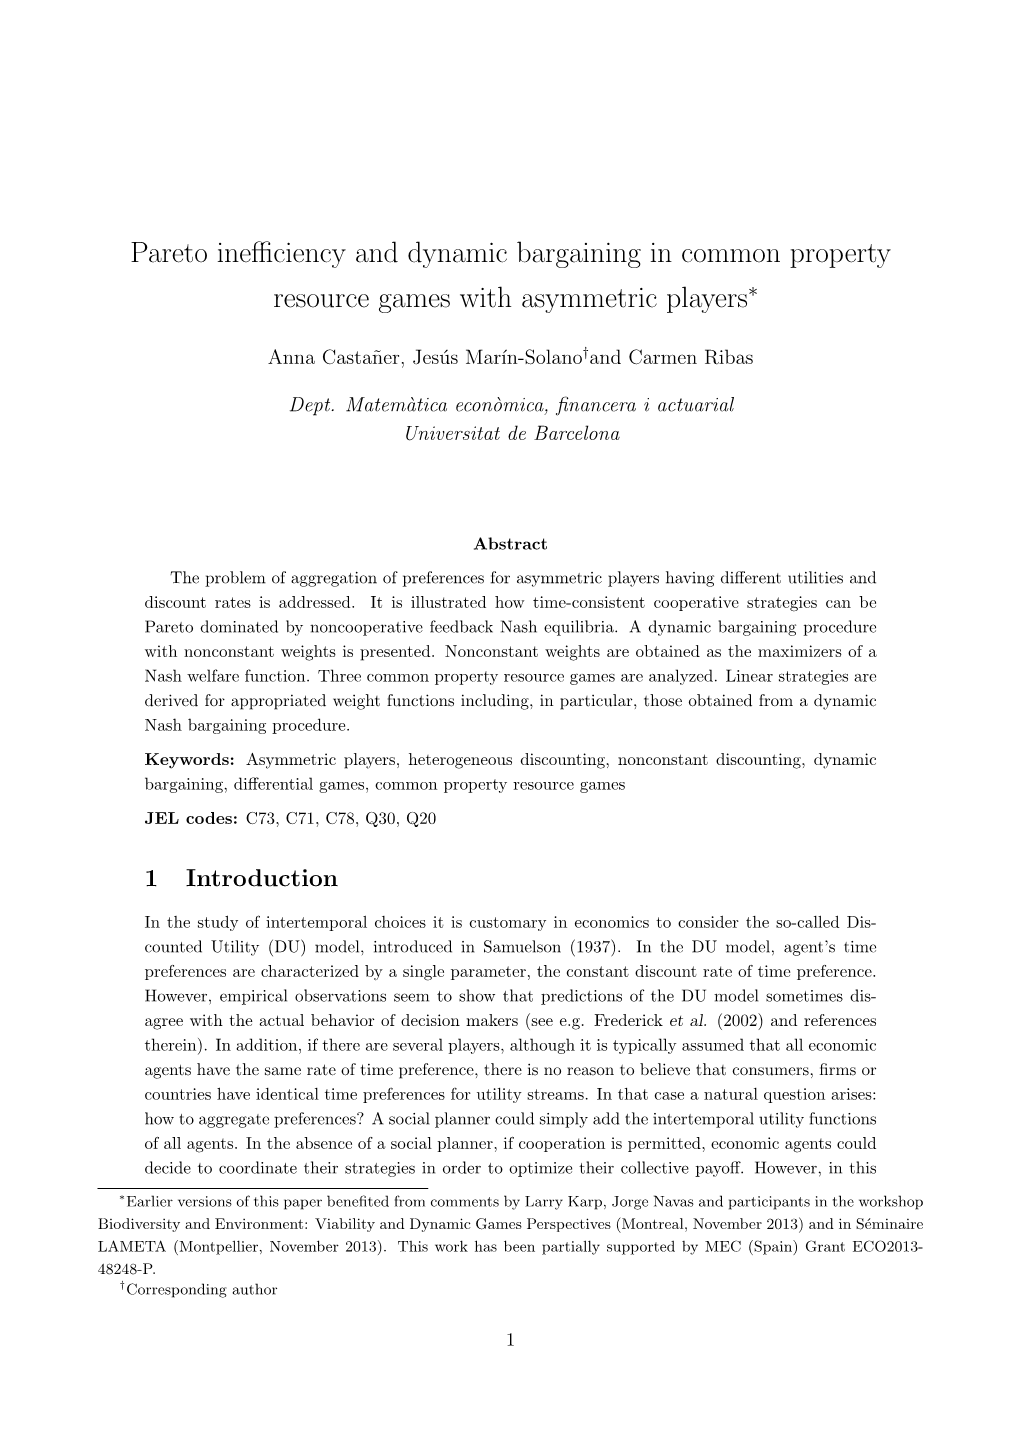 Pareto Inefficiency and Dynamic Bargaining in Common Property